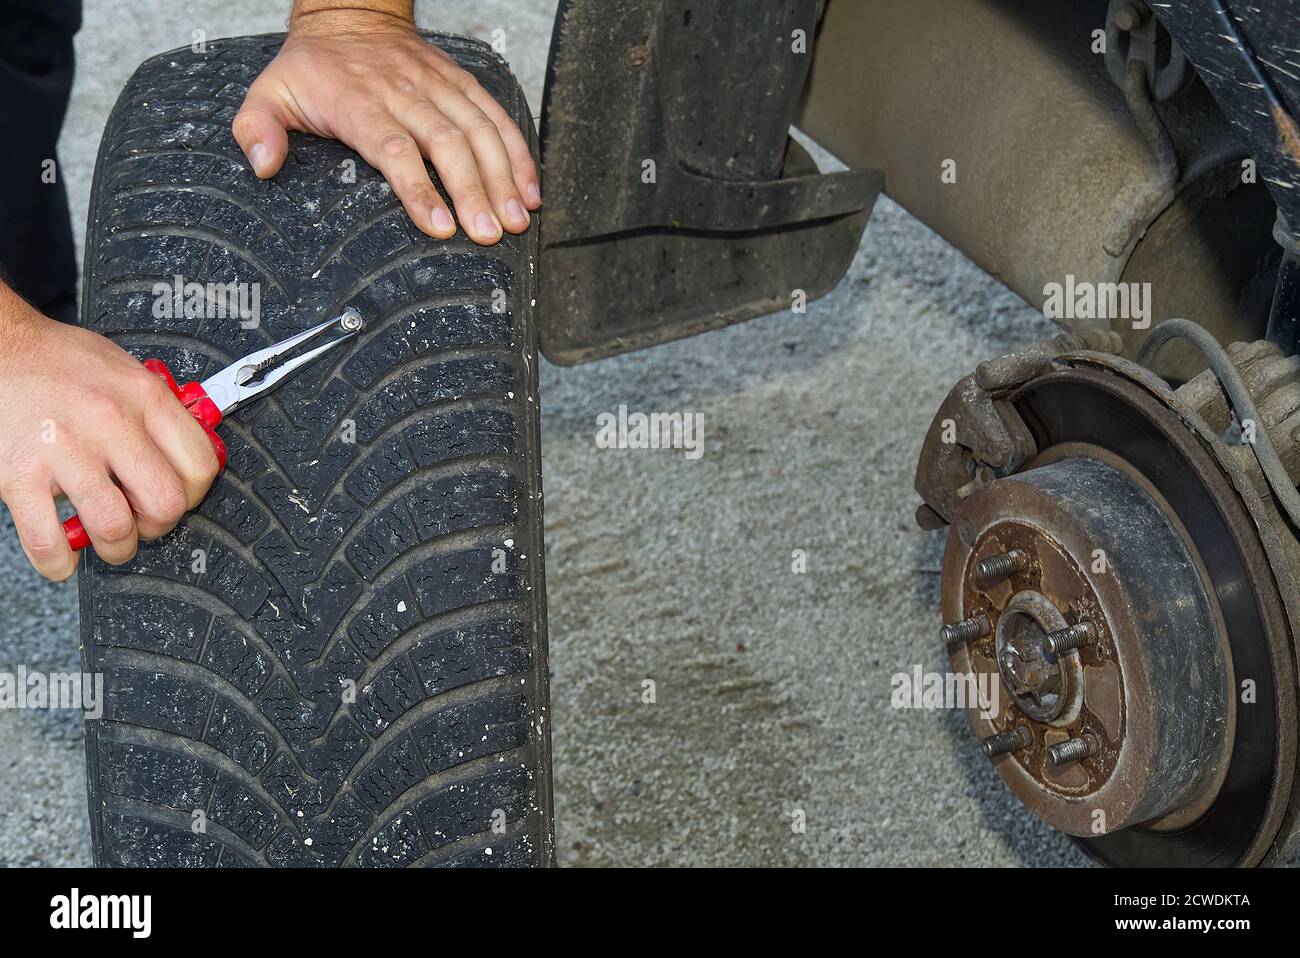 How to avoid a tyre puncture, repair a puncture, tyre pressure monitoring |  Autocar India